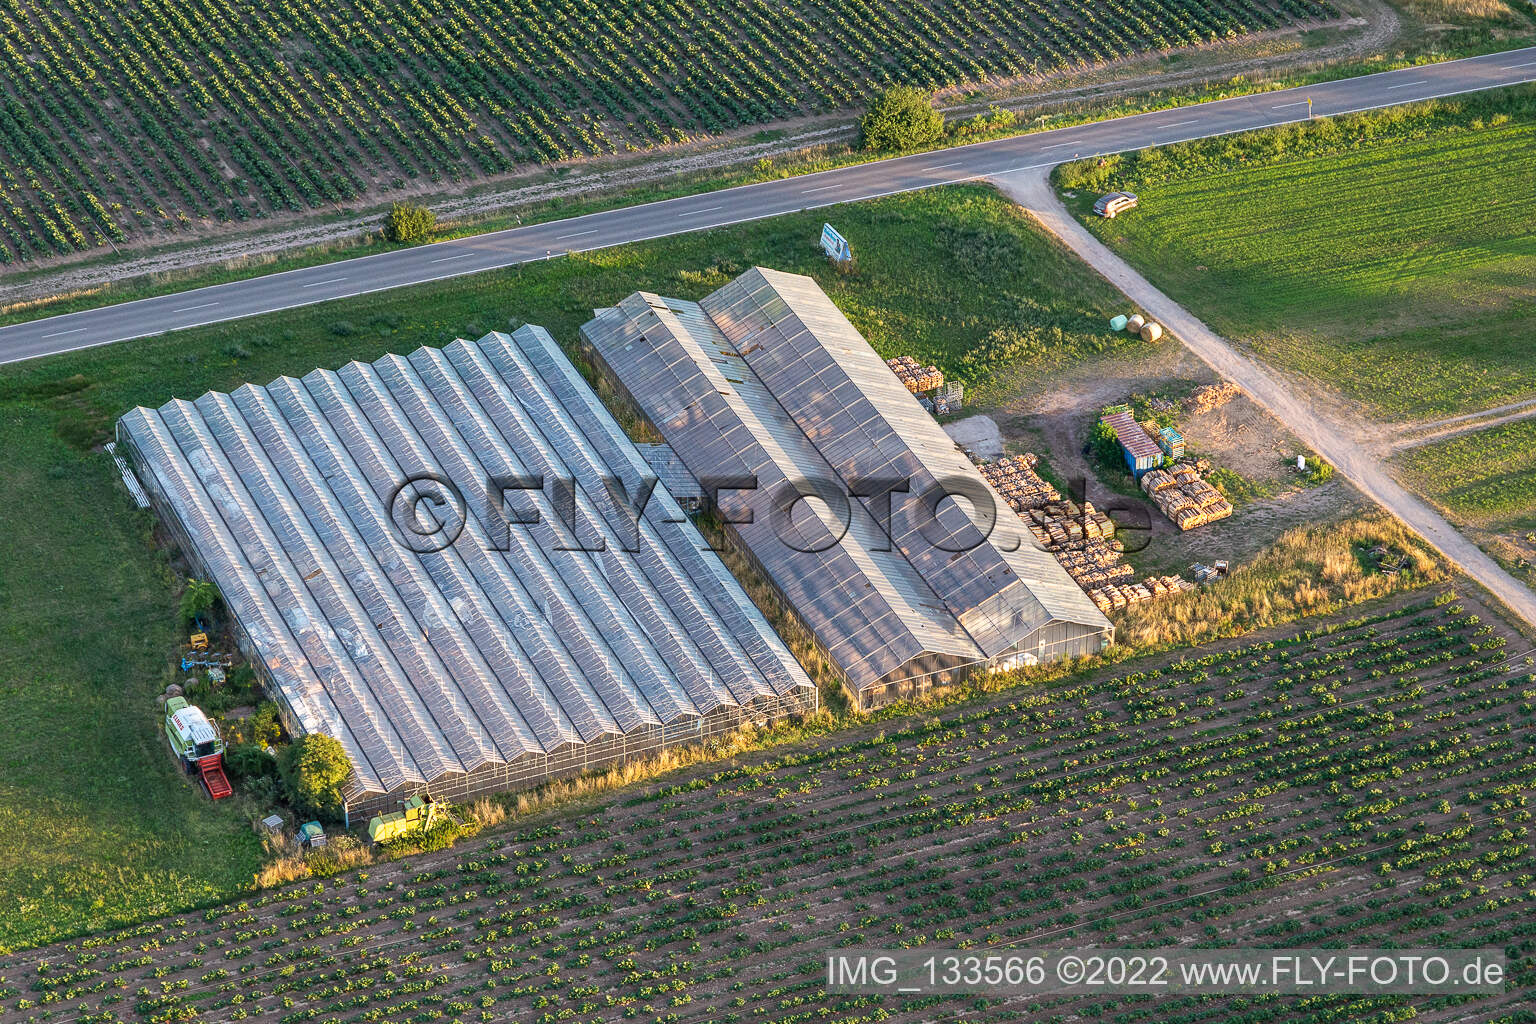 Greenhouses in Lustadt in the state Rhineland-Palatinate, Germany